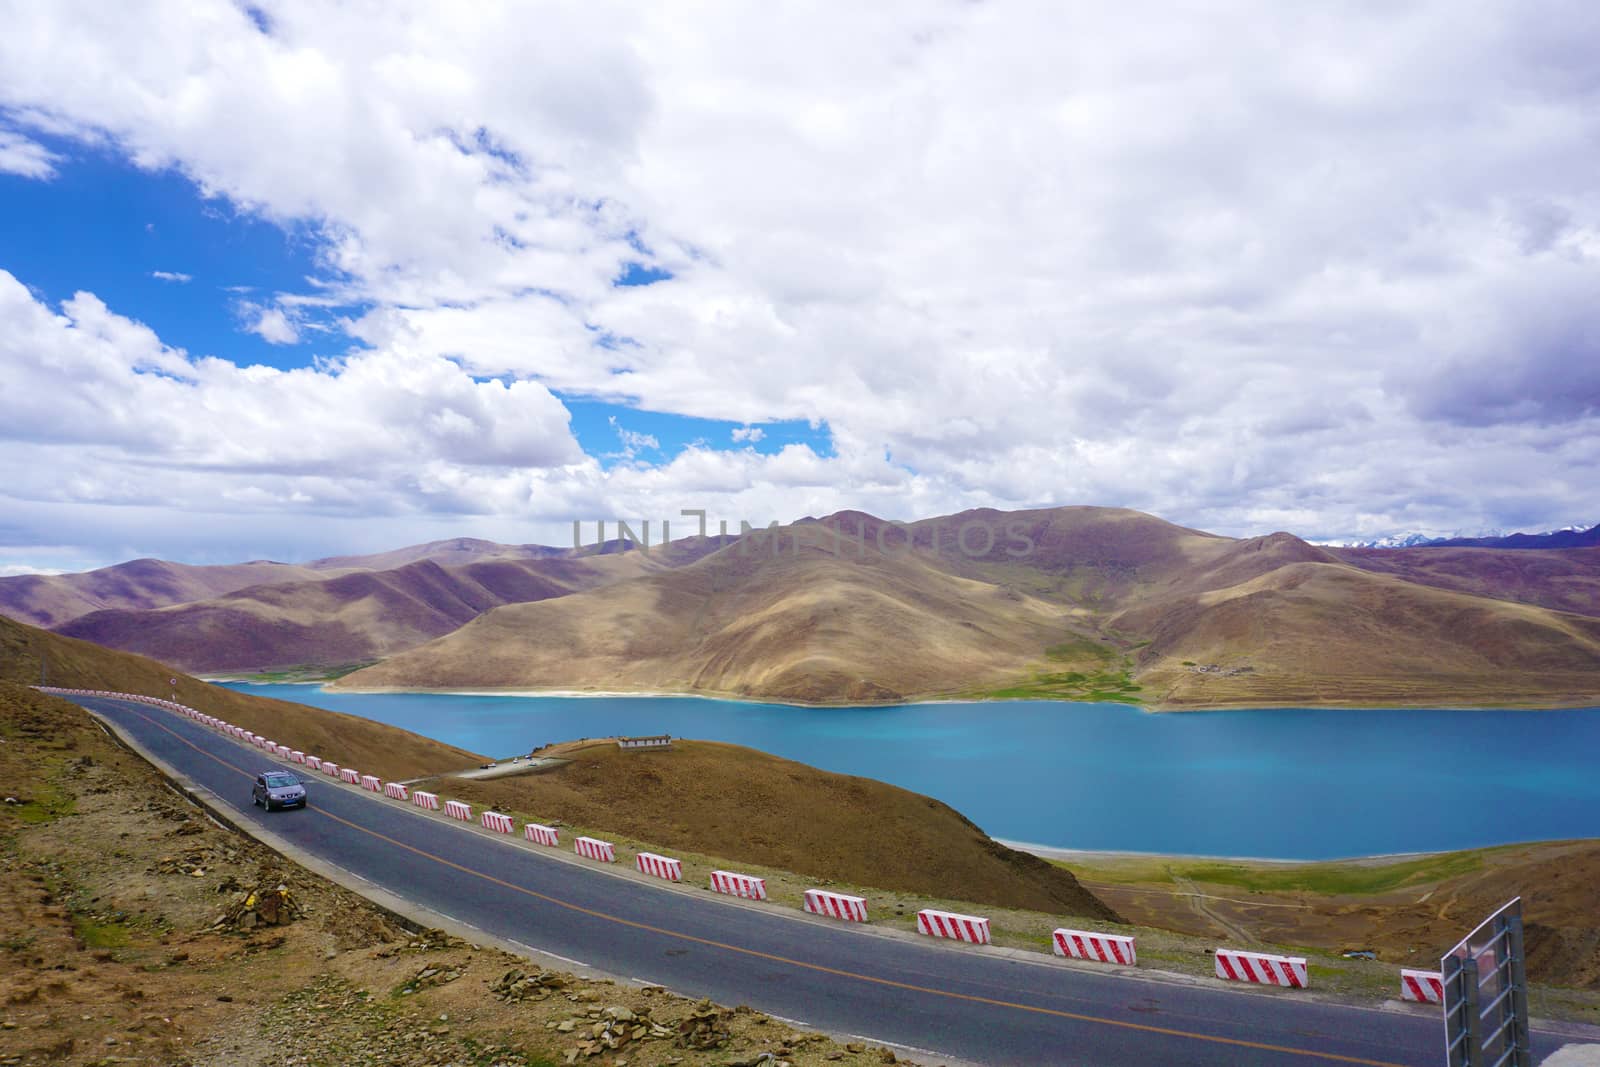 The Yamdrok Yumtso lake, one of the three largest sacred lakes in Tibet.